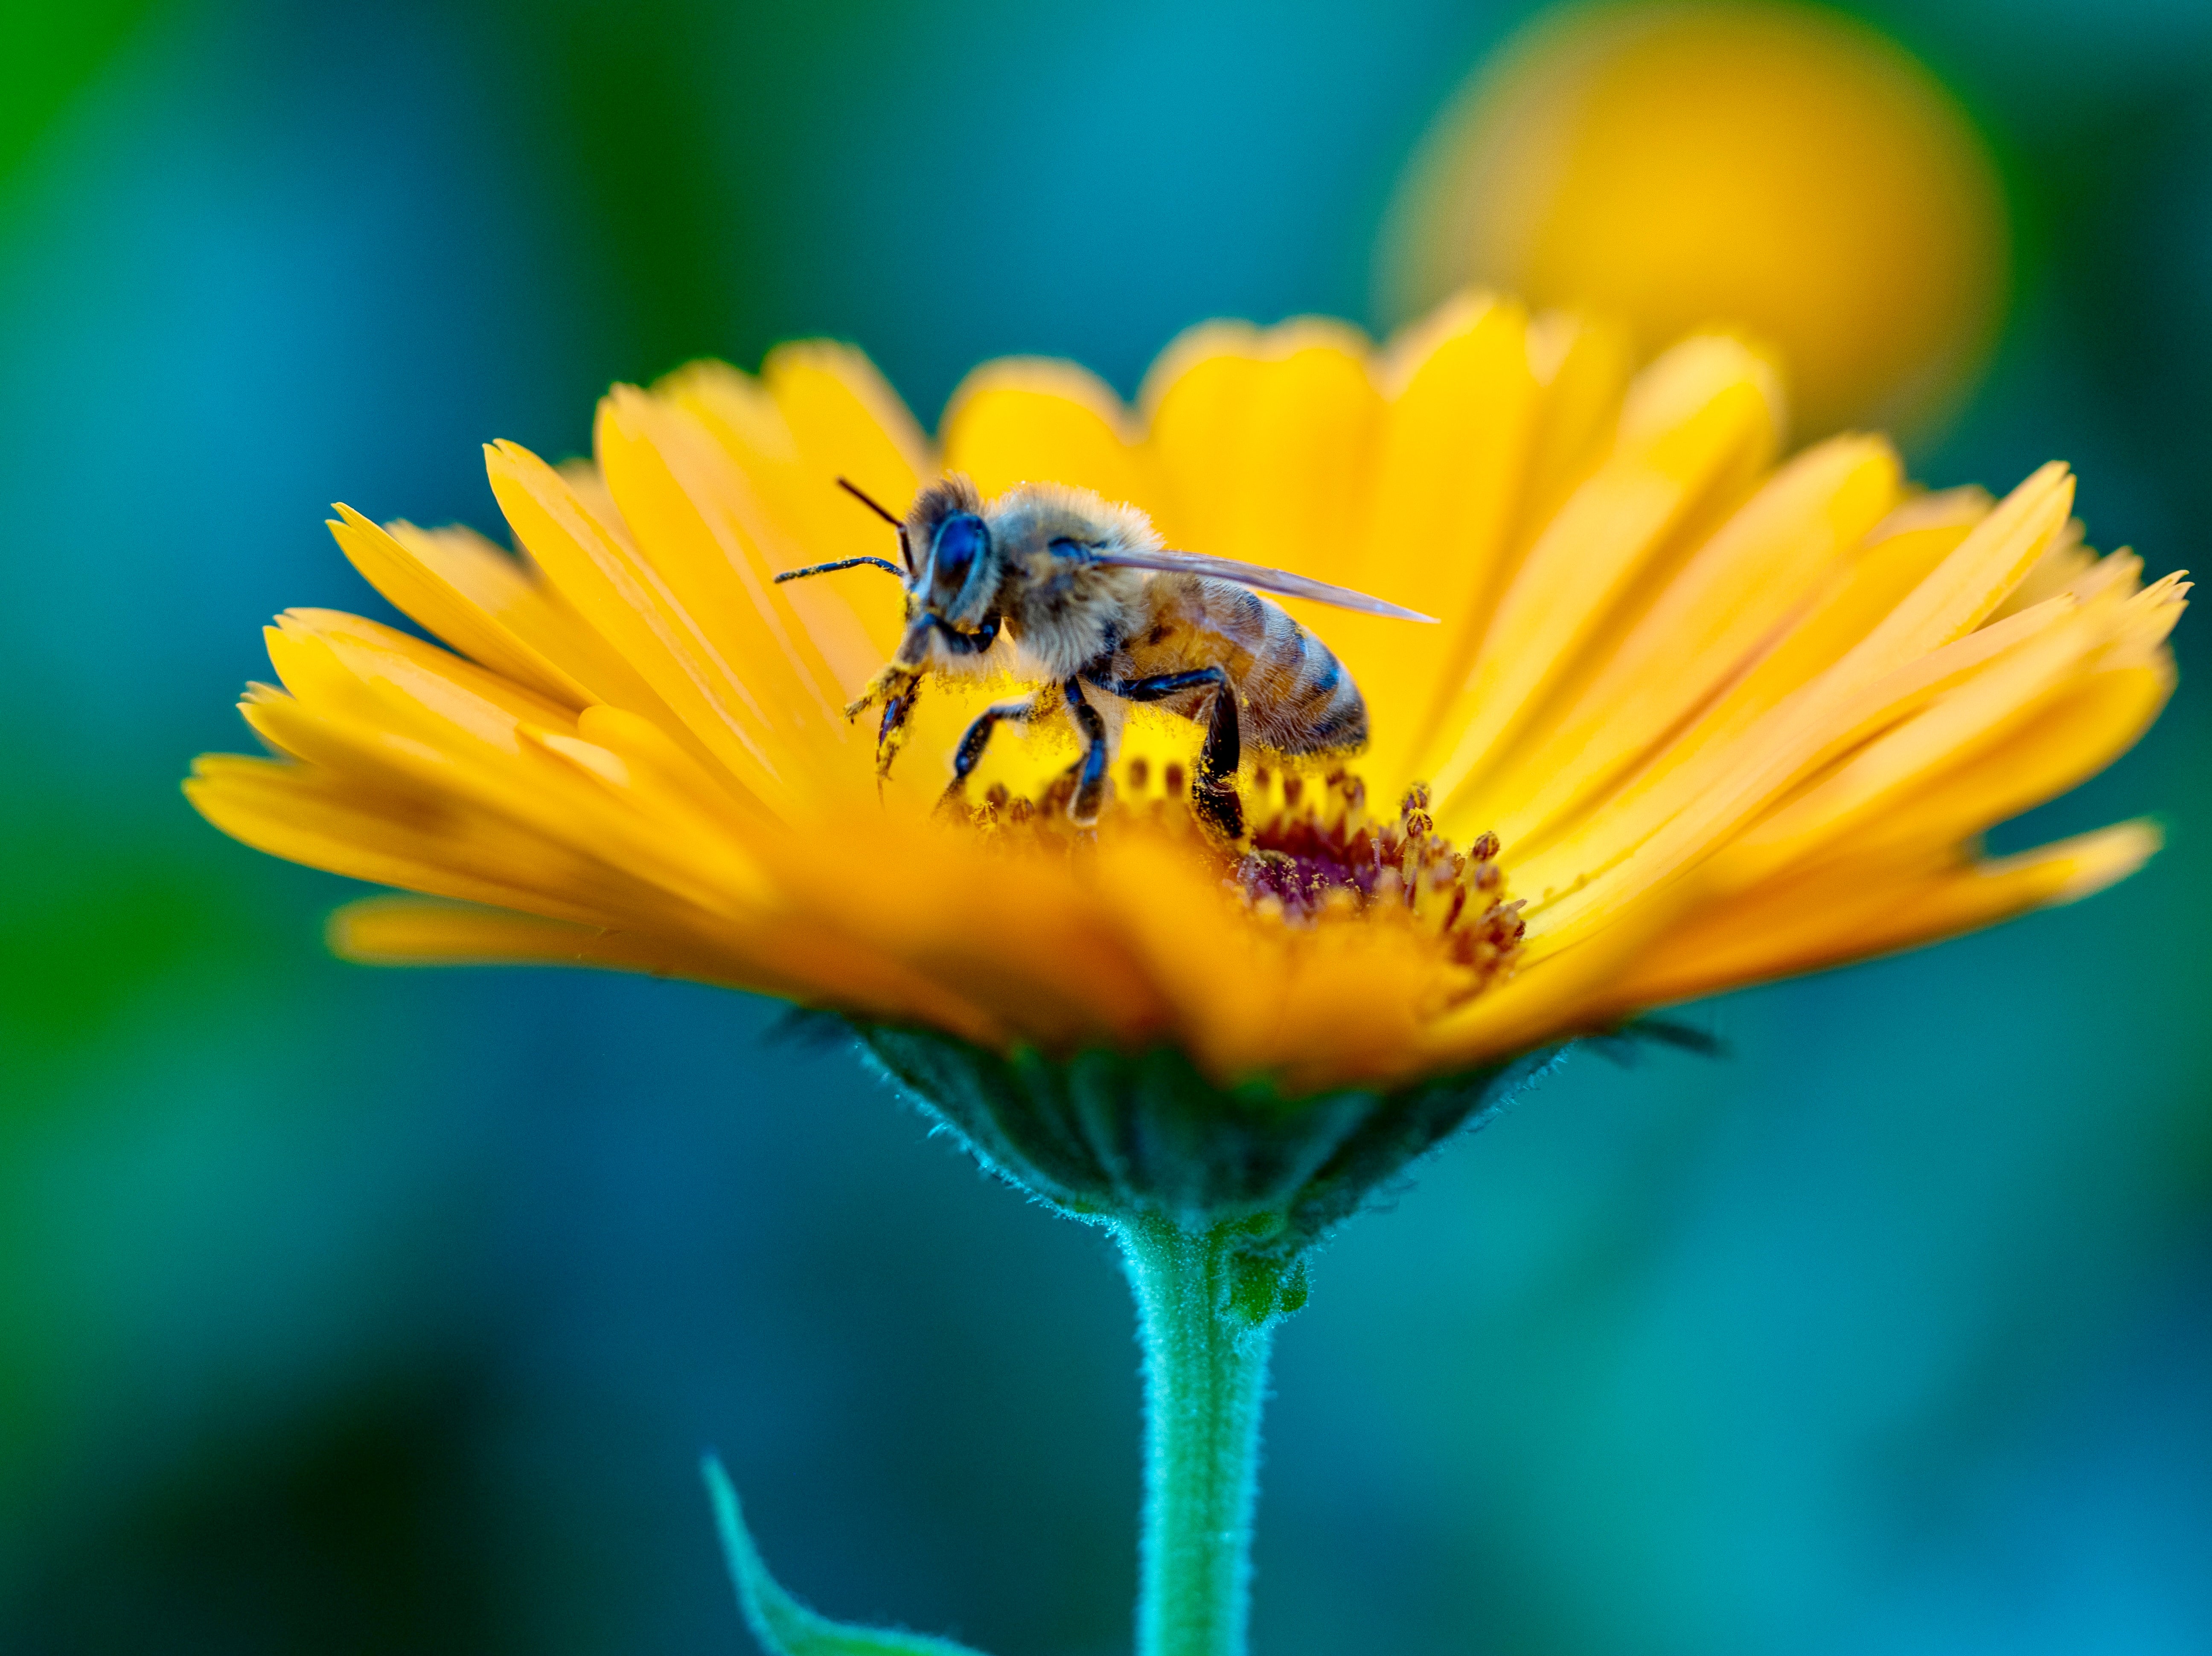 Honey bees are important pollinators for helping flowers, fruits and vegetables grow